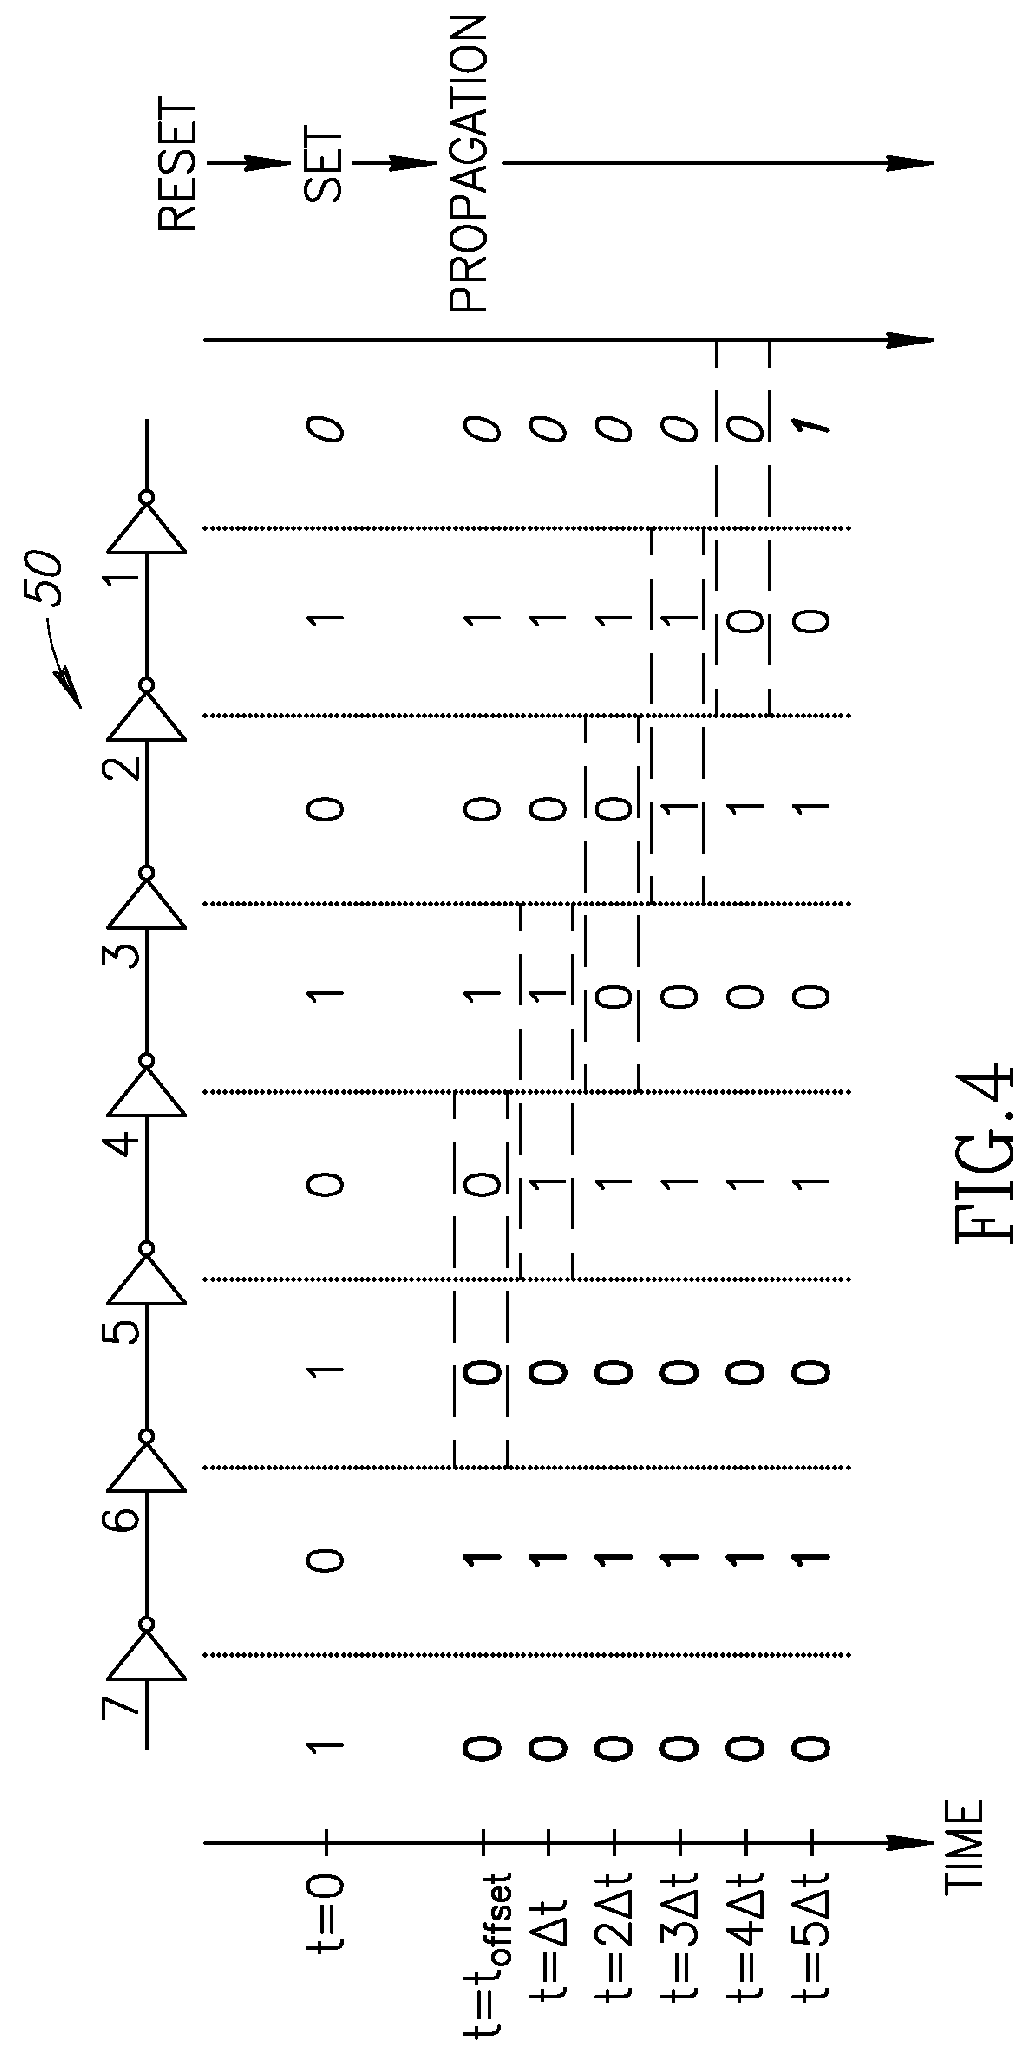 Fractional-N Frequency Synthesizer Incorporating Cyclic Digital-To-Time And Time-To-Digital Circuit Pair